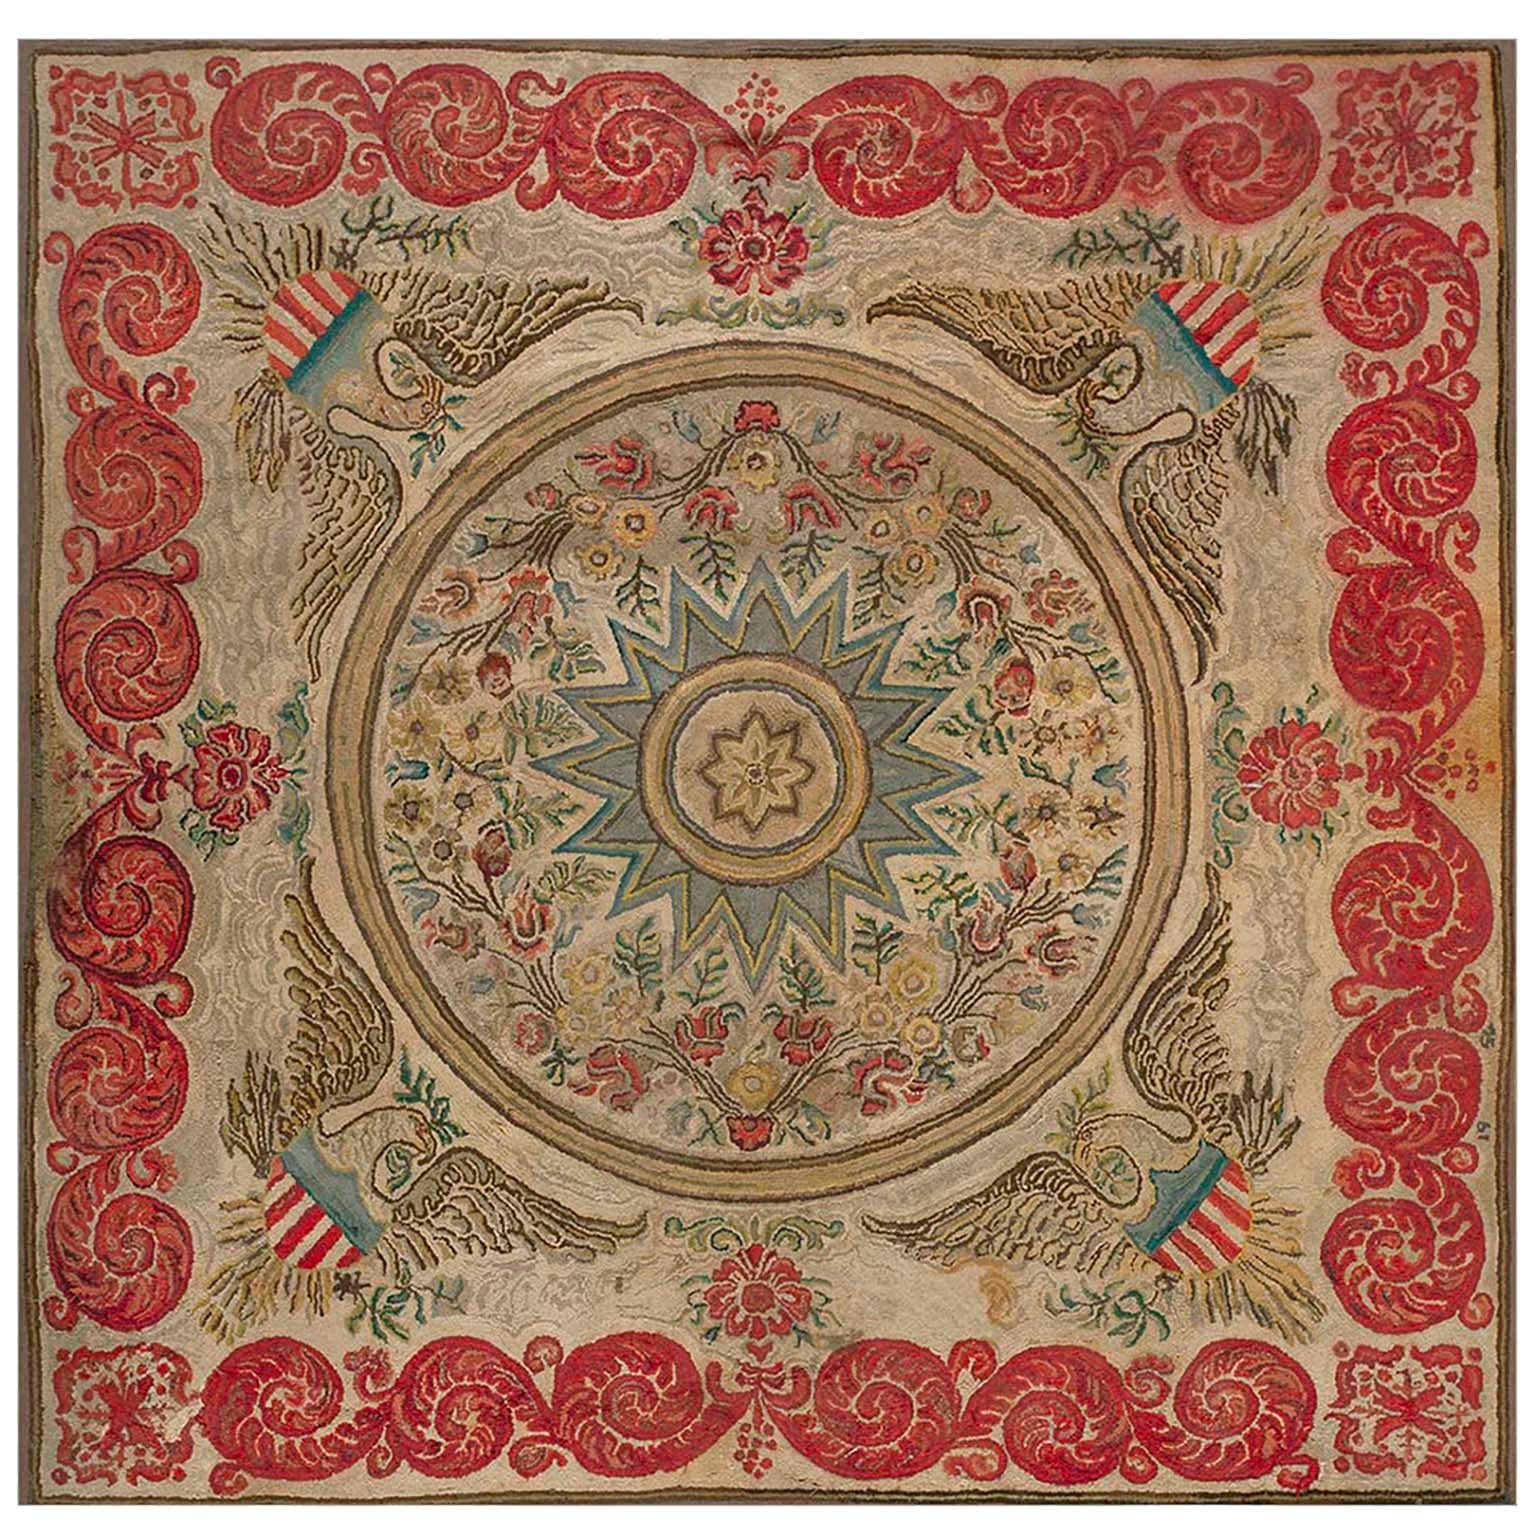 Early 20th Century  American Hooked Rug ( 6' 8'' x 6' 8'' - 203 x 203 )